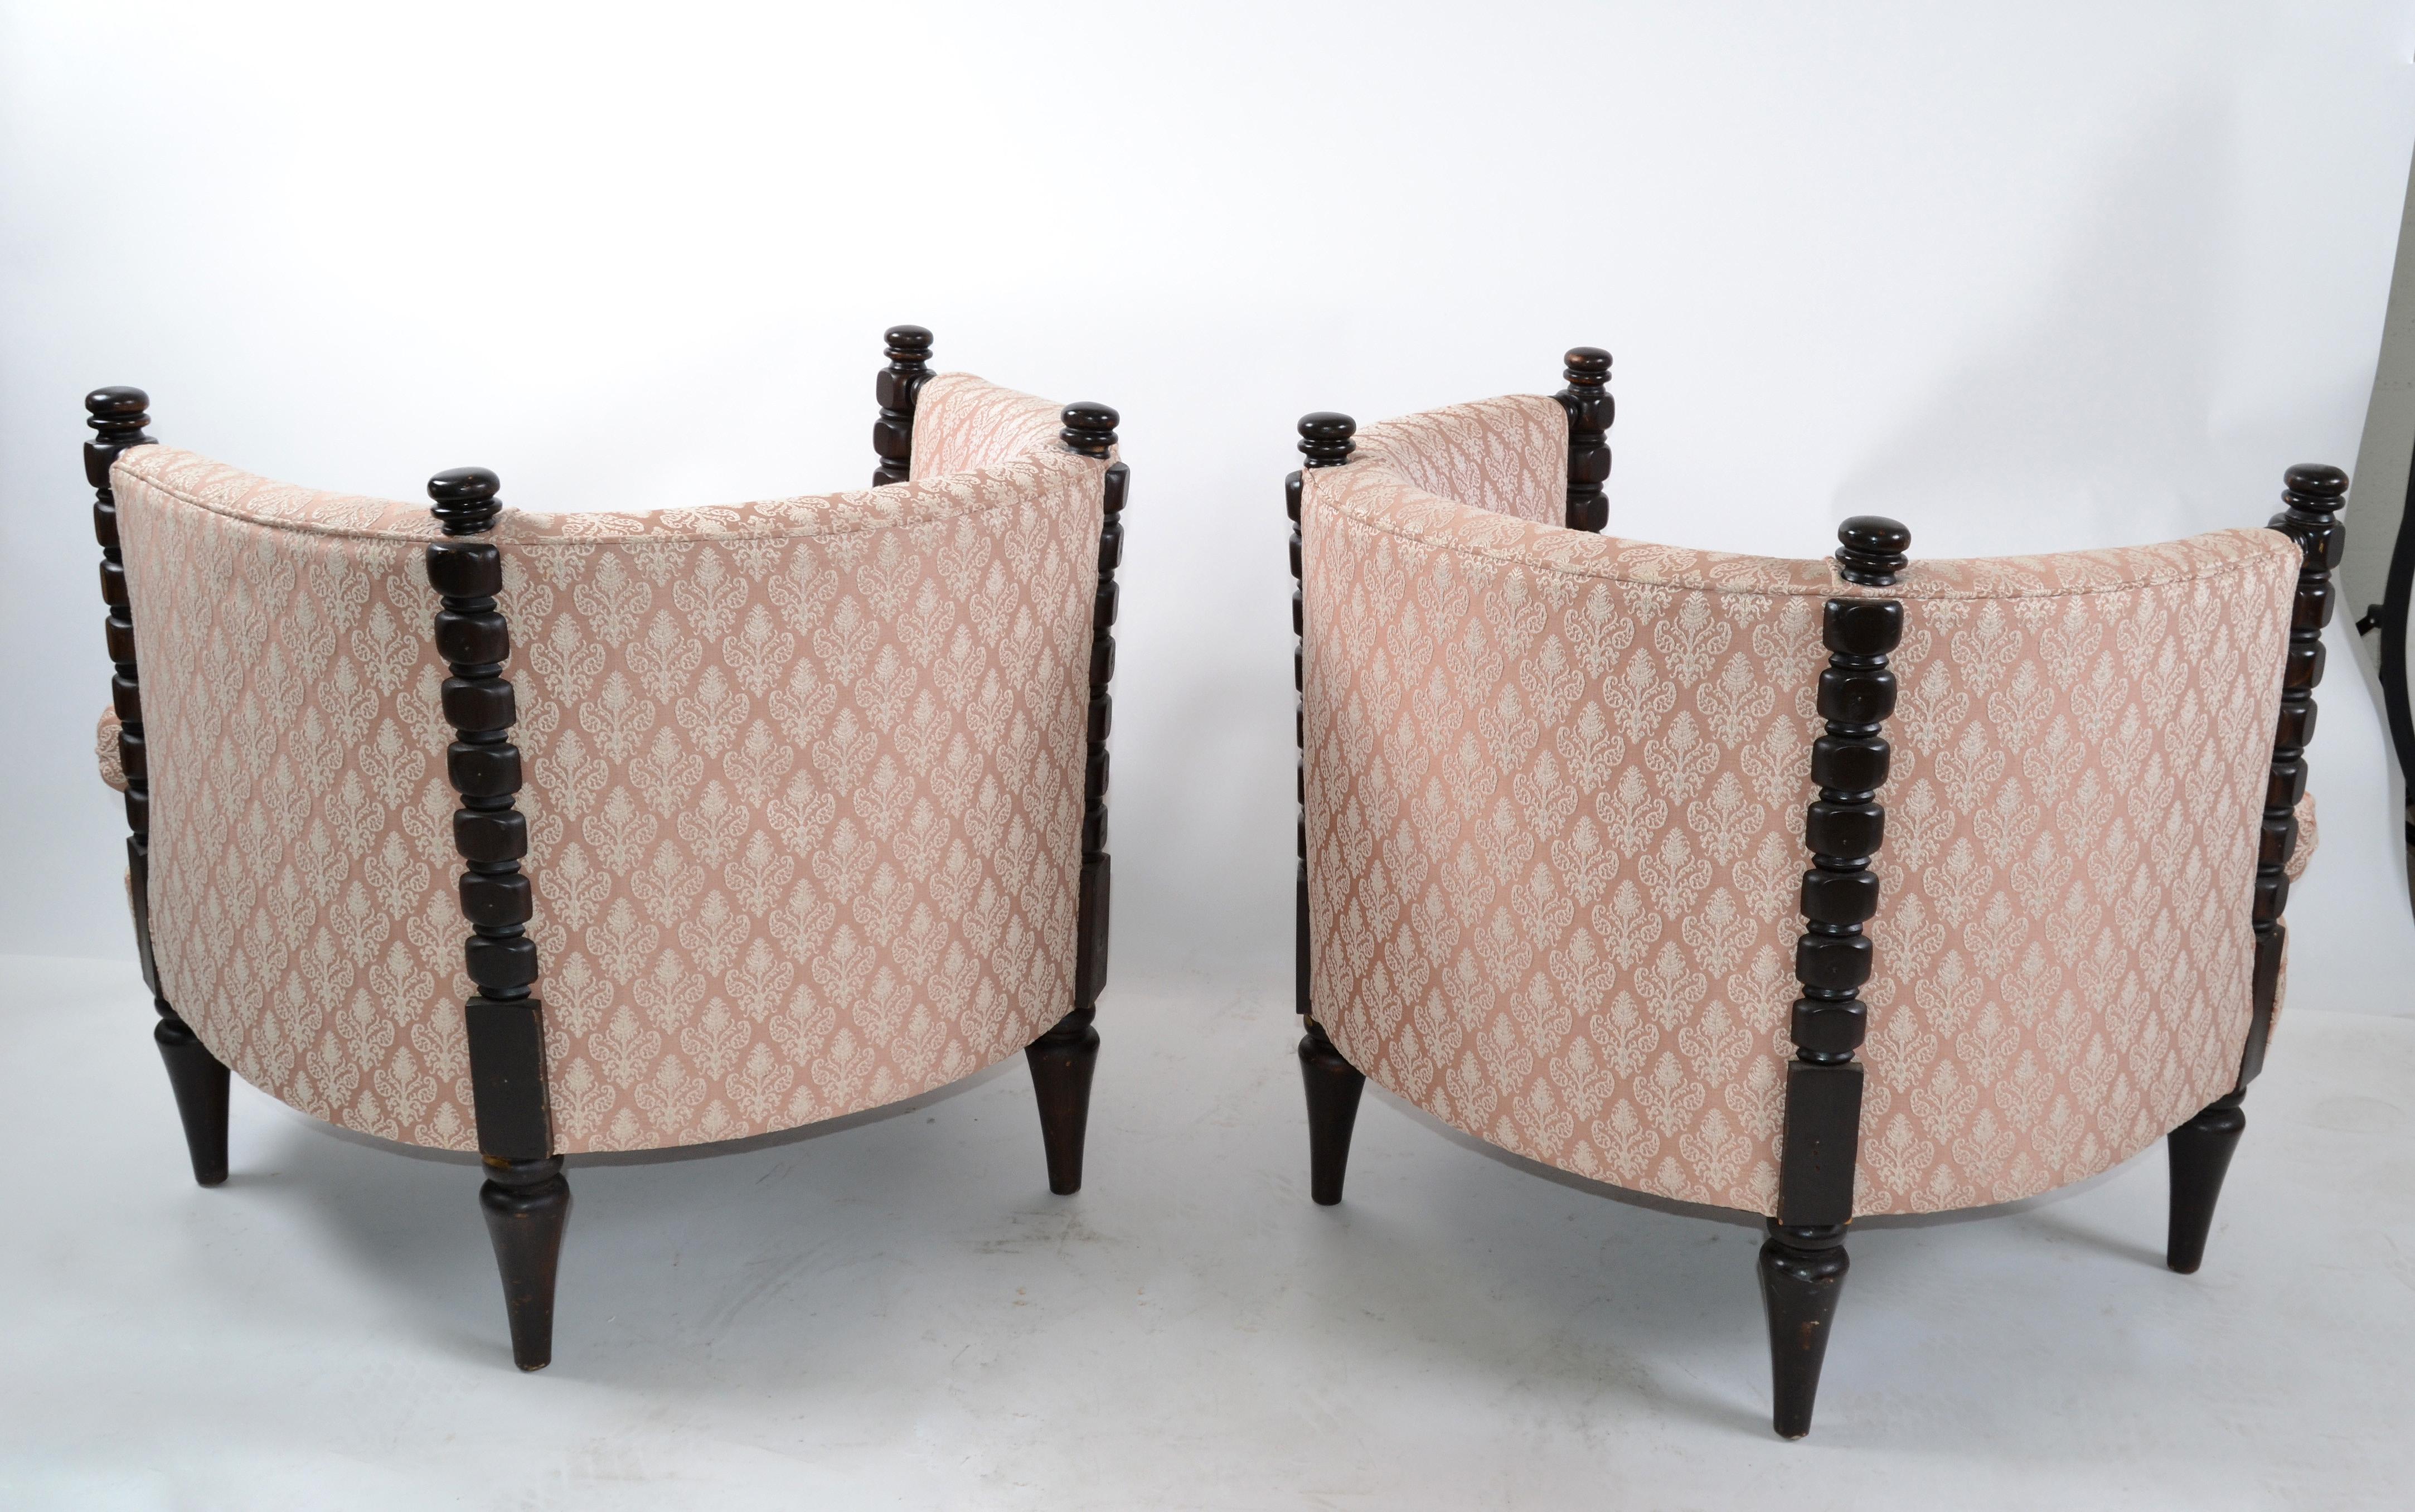 20th Century 1950s Turned Wood and Tufted Fabric Upholstery Barrel Chairs, Club Chairs, Pair